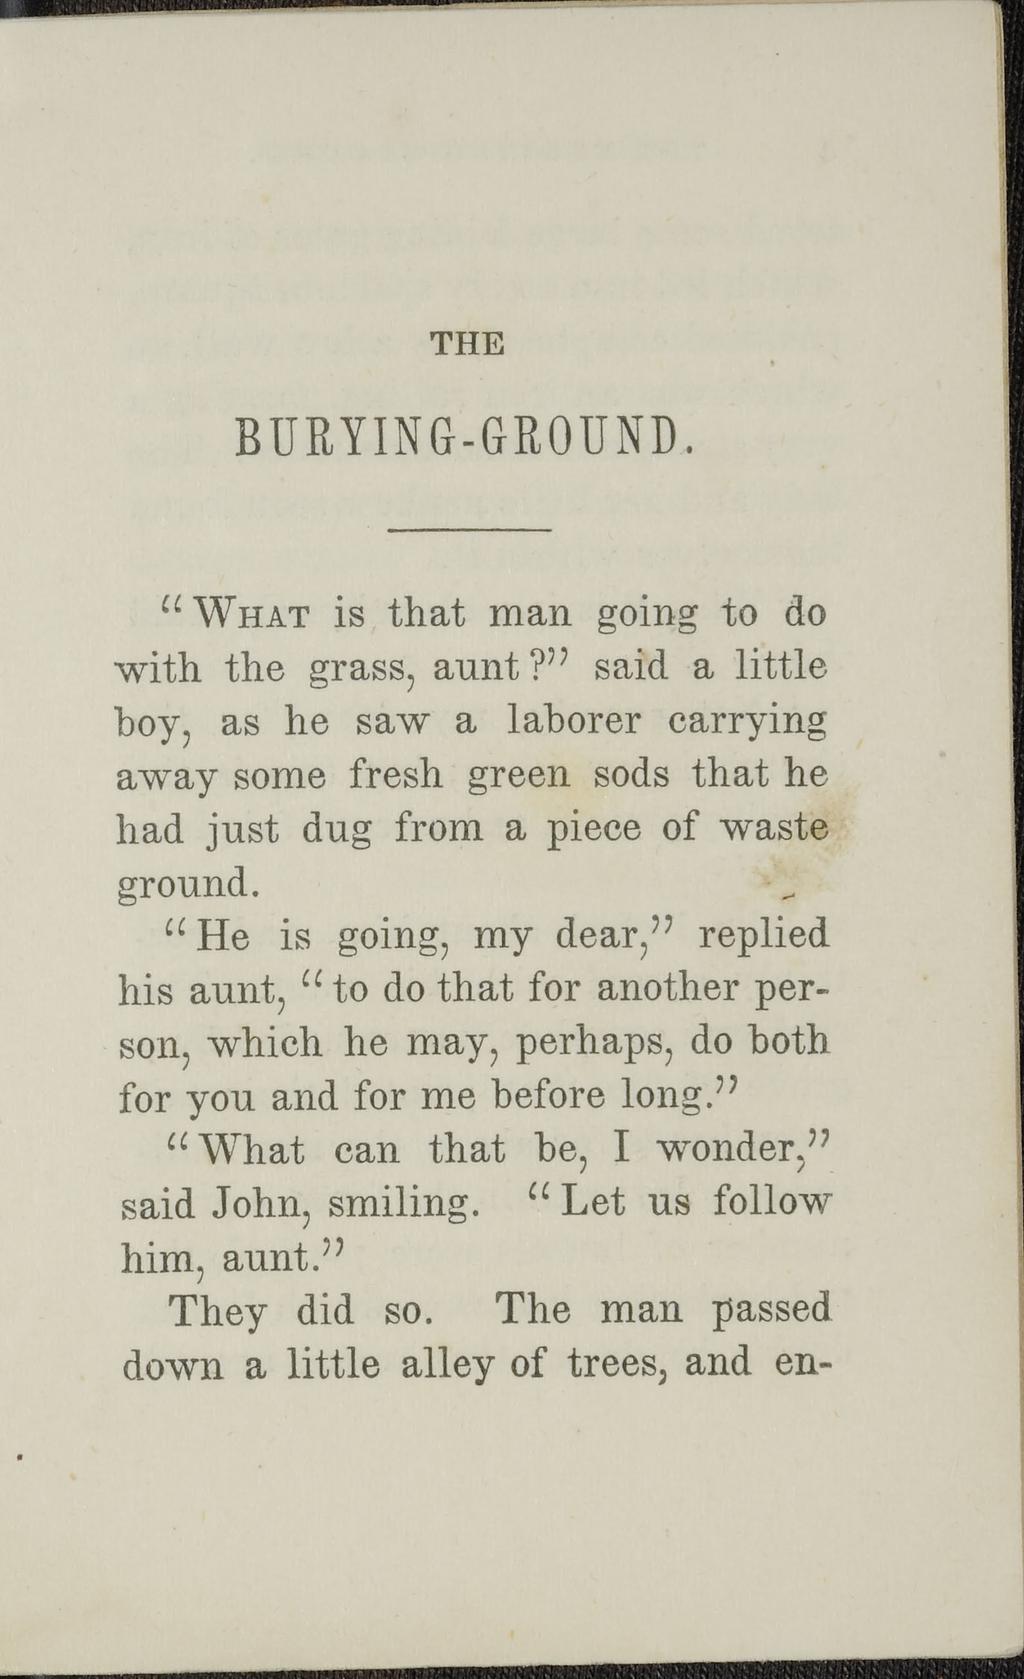 THE BURYING-GROUND. W HAT is that man going to do with the grass, aunt? said a little boy, as he saw a laborer carrying away some fresh green sods that he had just dug from a piece of waste ground.